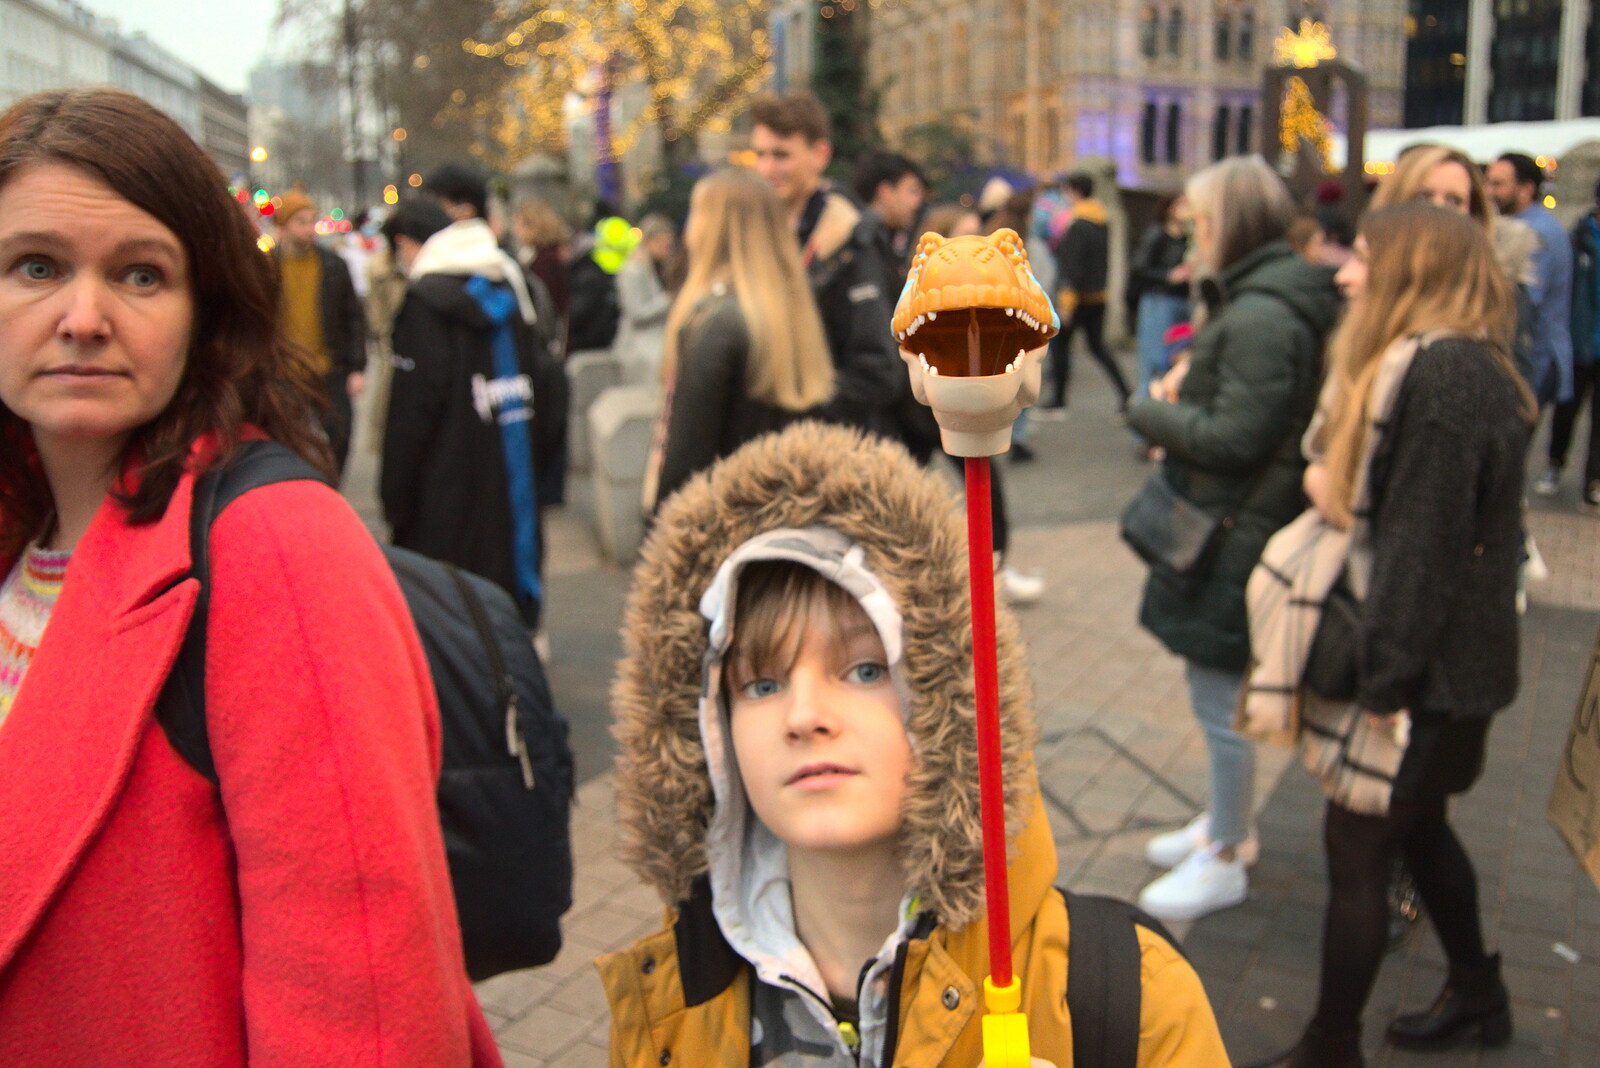 Harry's got a dinosaur head on a stick from A Trip to the Natural History Museum, Kensington, London - 15th January 2022